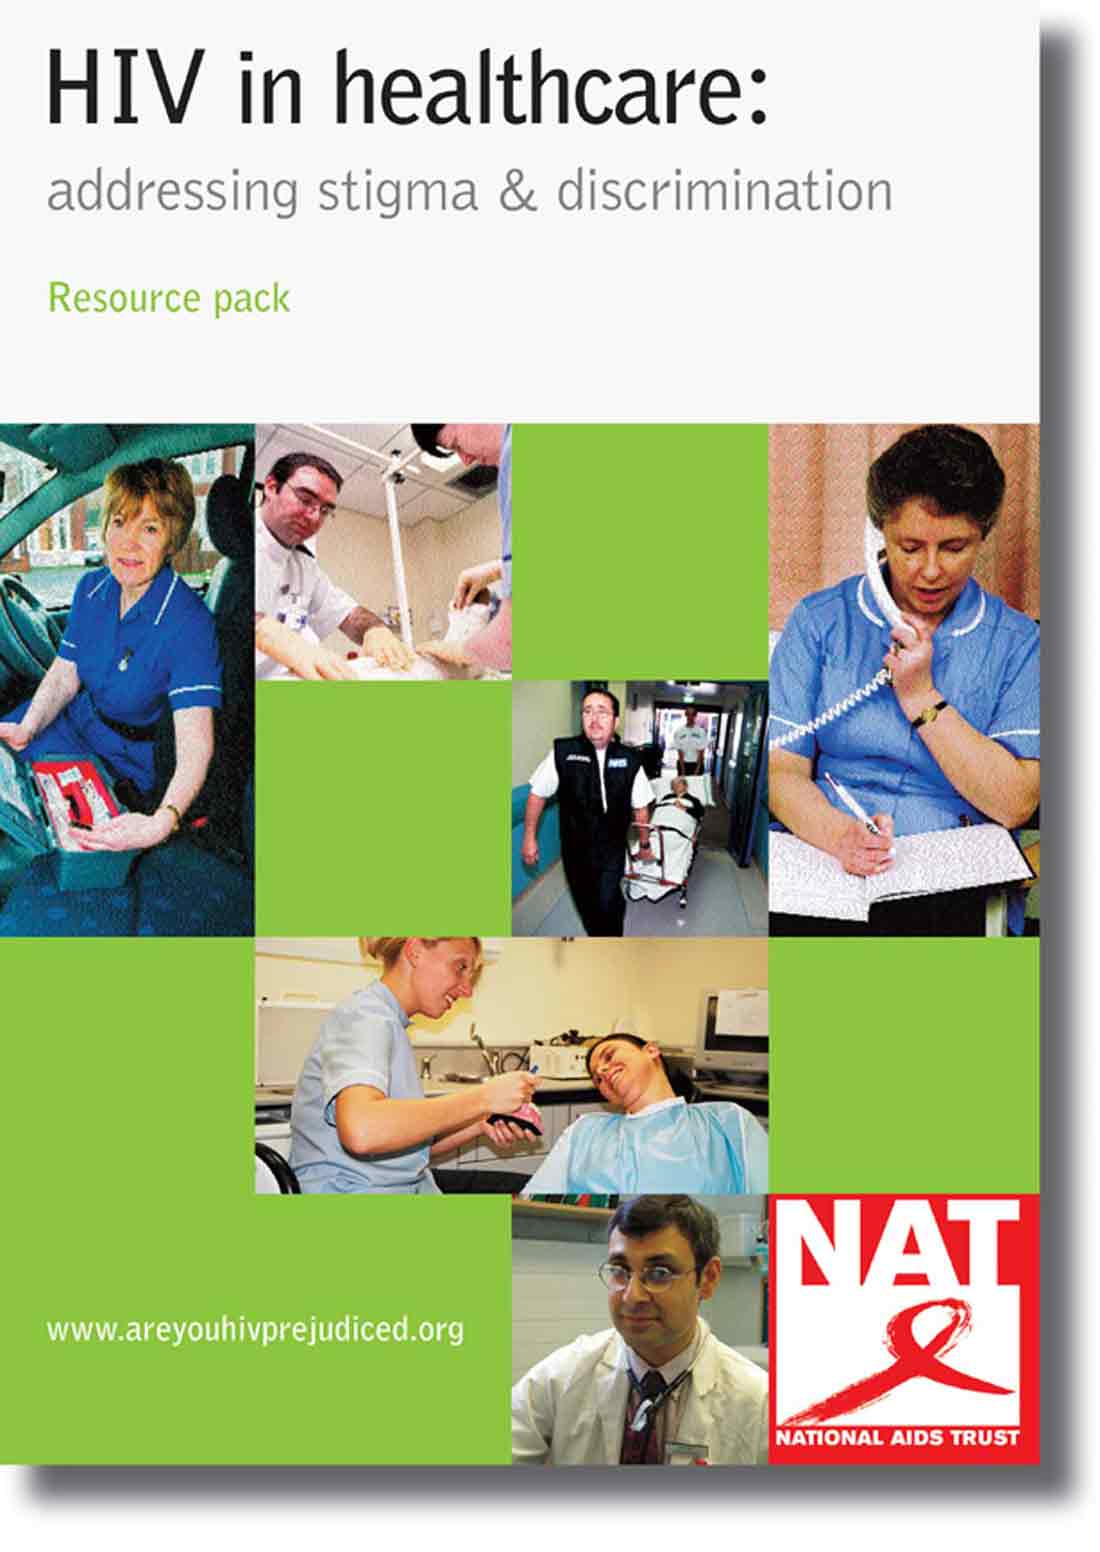 National Aids Trust Healthcare pack designed by ideology.uk.com